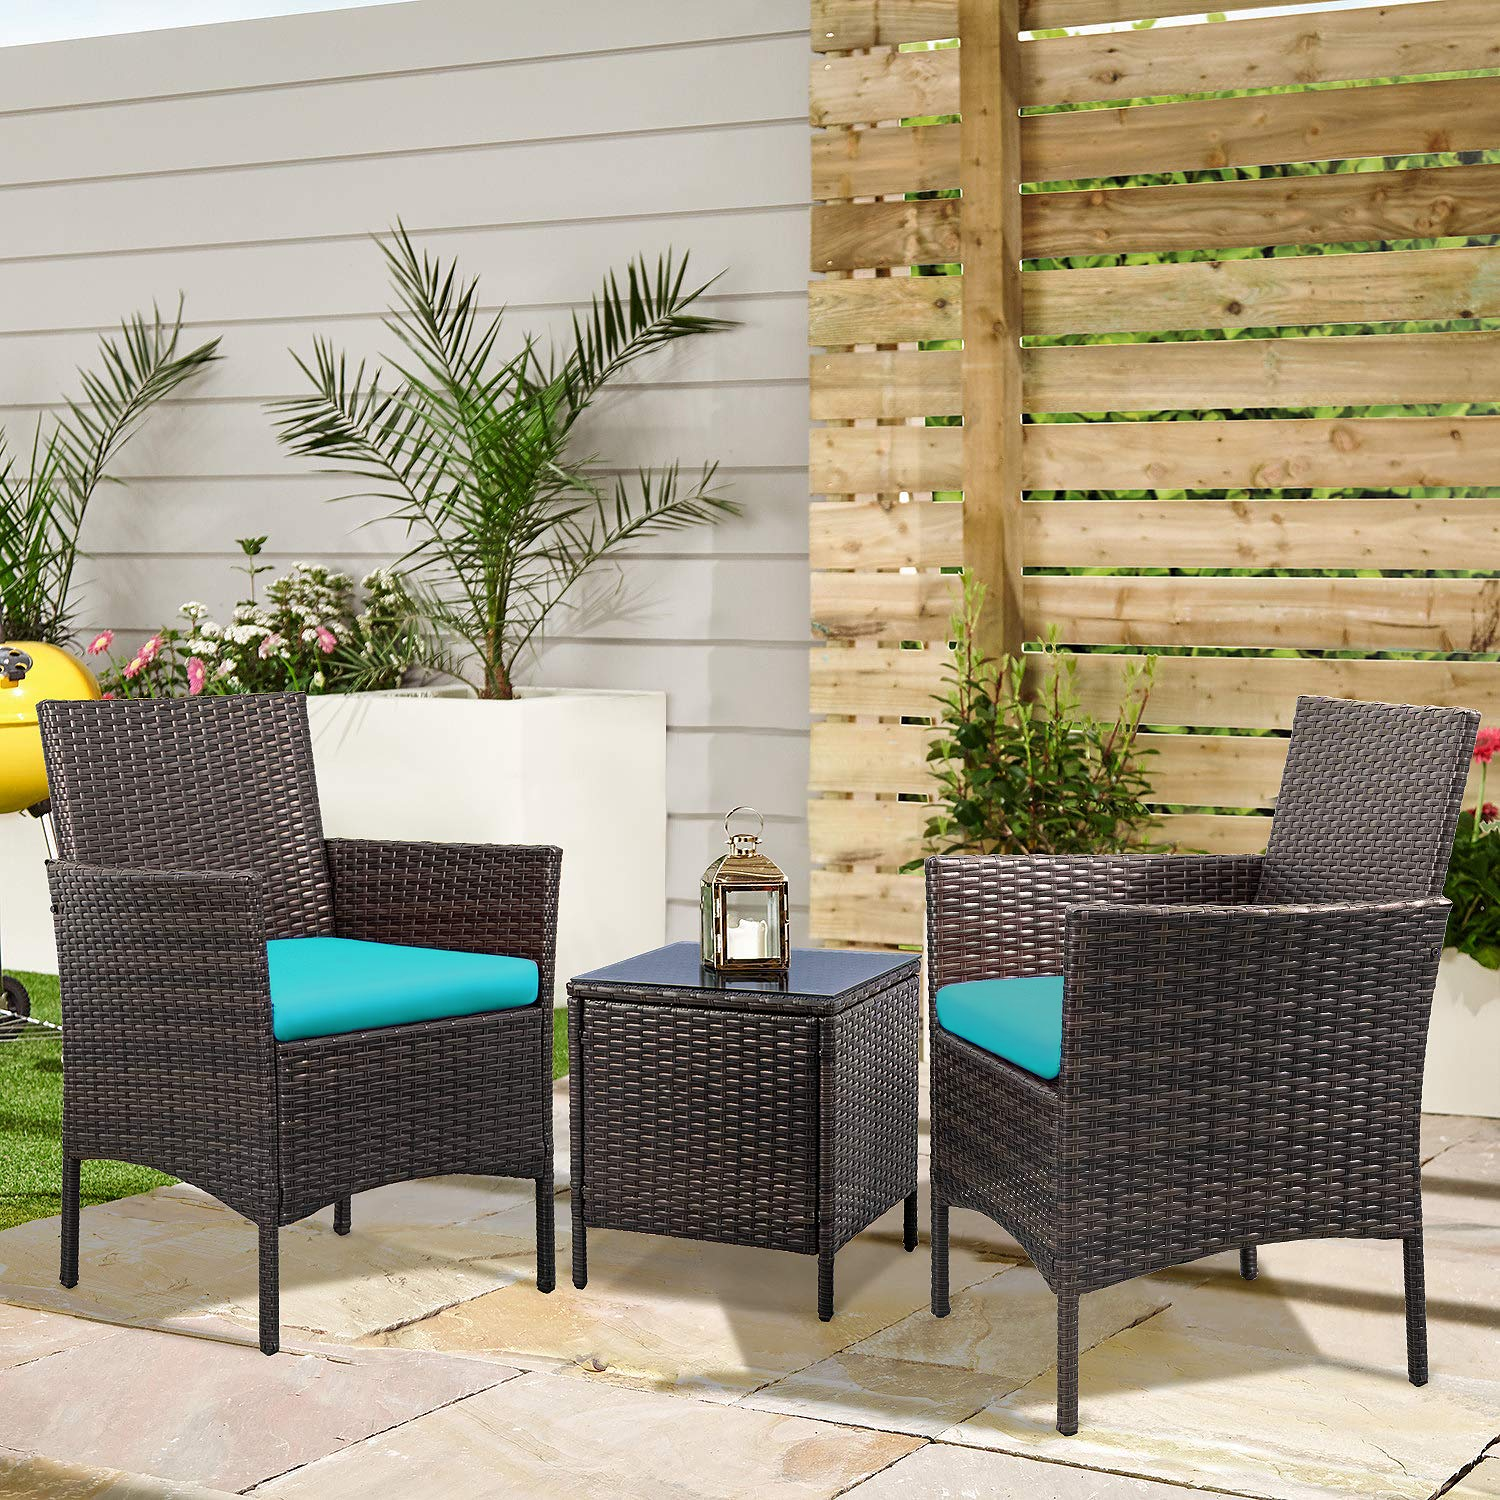 Lacoo 3 Pieces Outdoor Patio Furniture PE Rattan Wicker Table and Chairs Set Bar Set with Cushioned Tempered Glass (Brown / Blue) - image 4 of 7